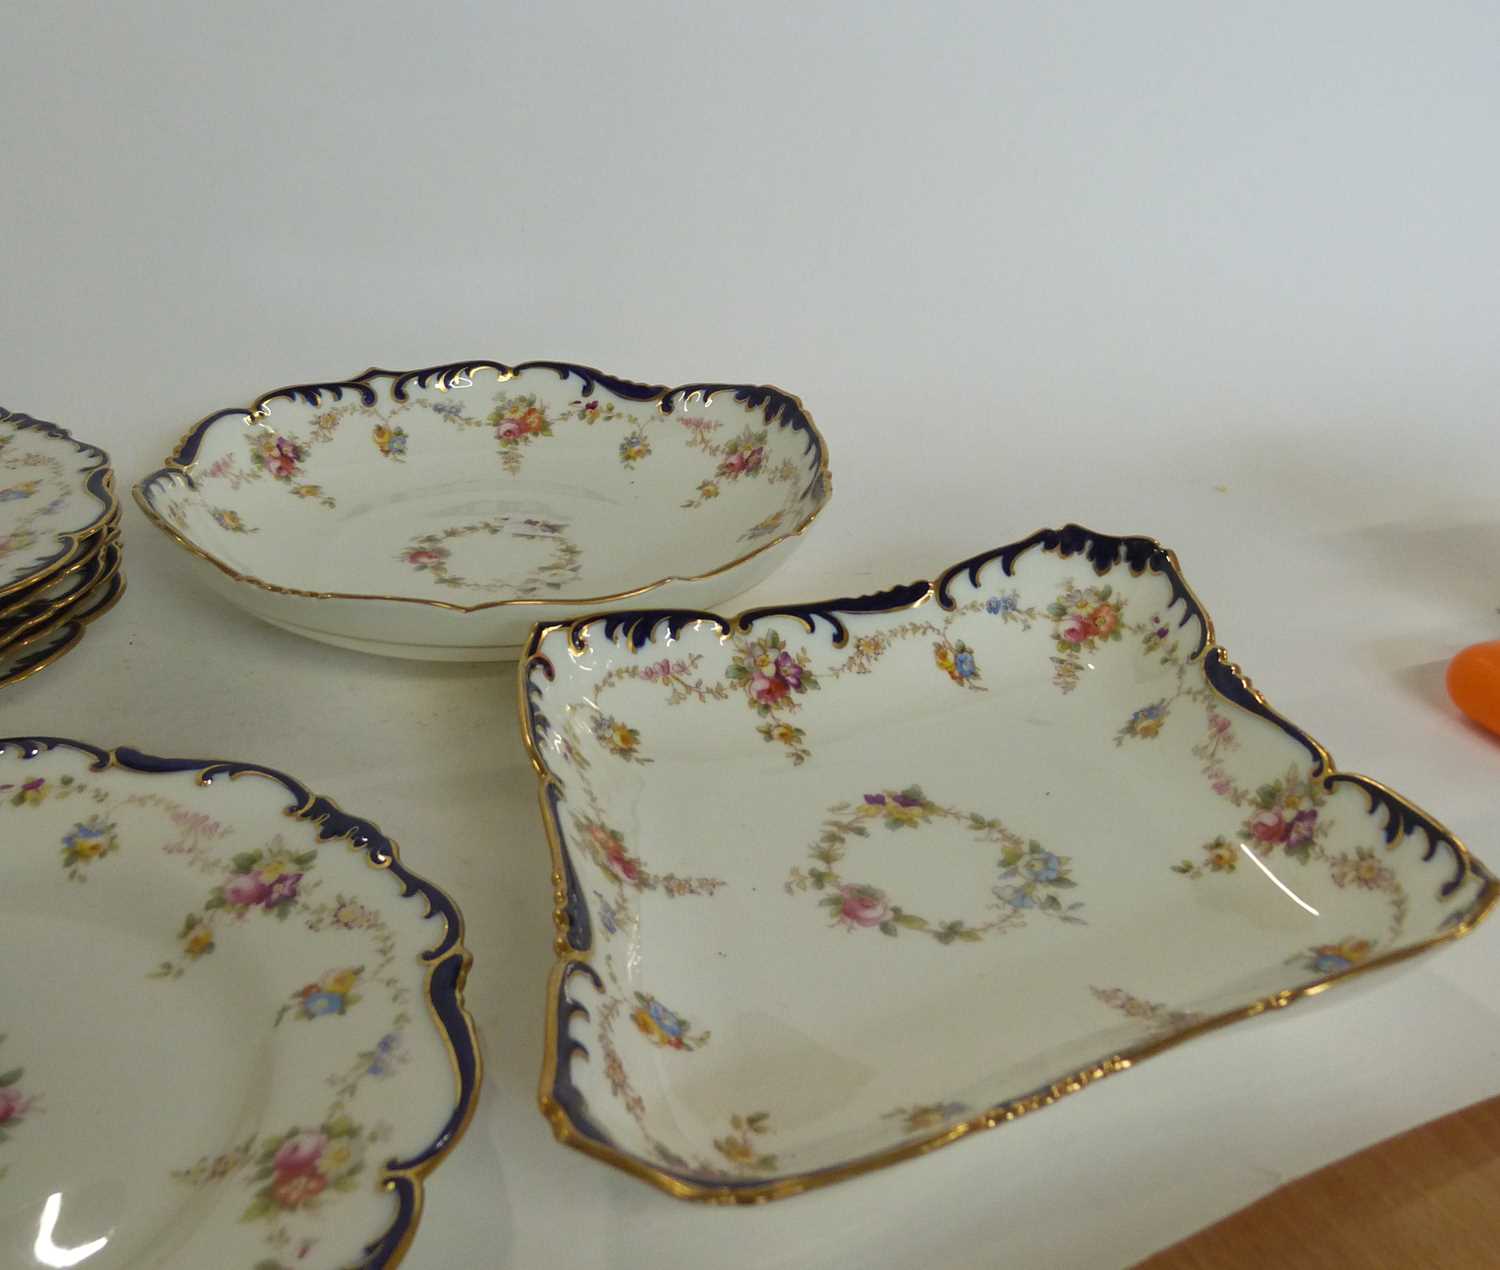 Quantity of Cauldon tea wares, all with printed floral designs within blue scroll borders, - Image 3 of 8